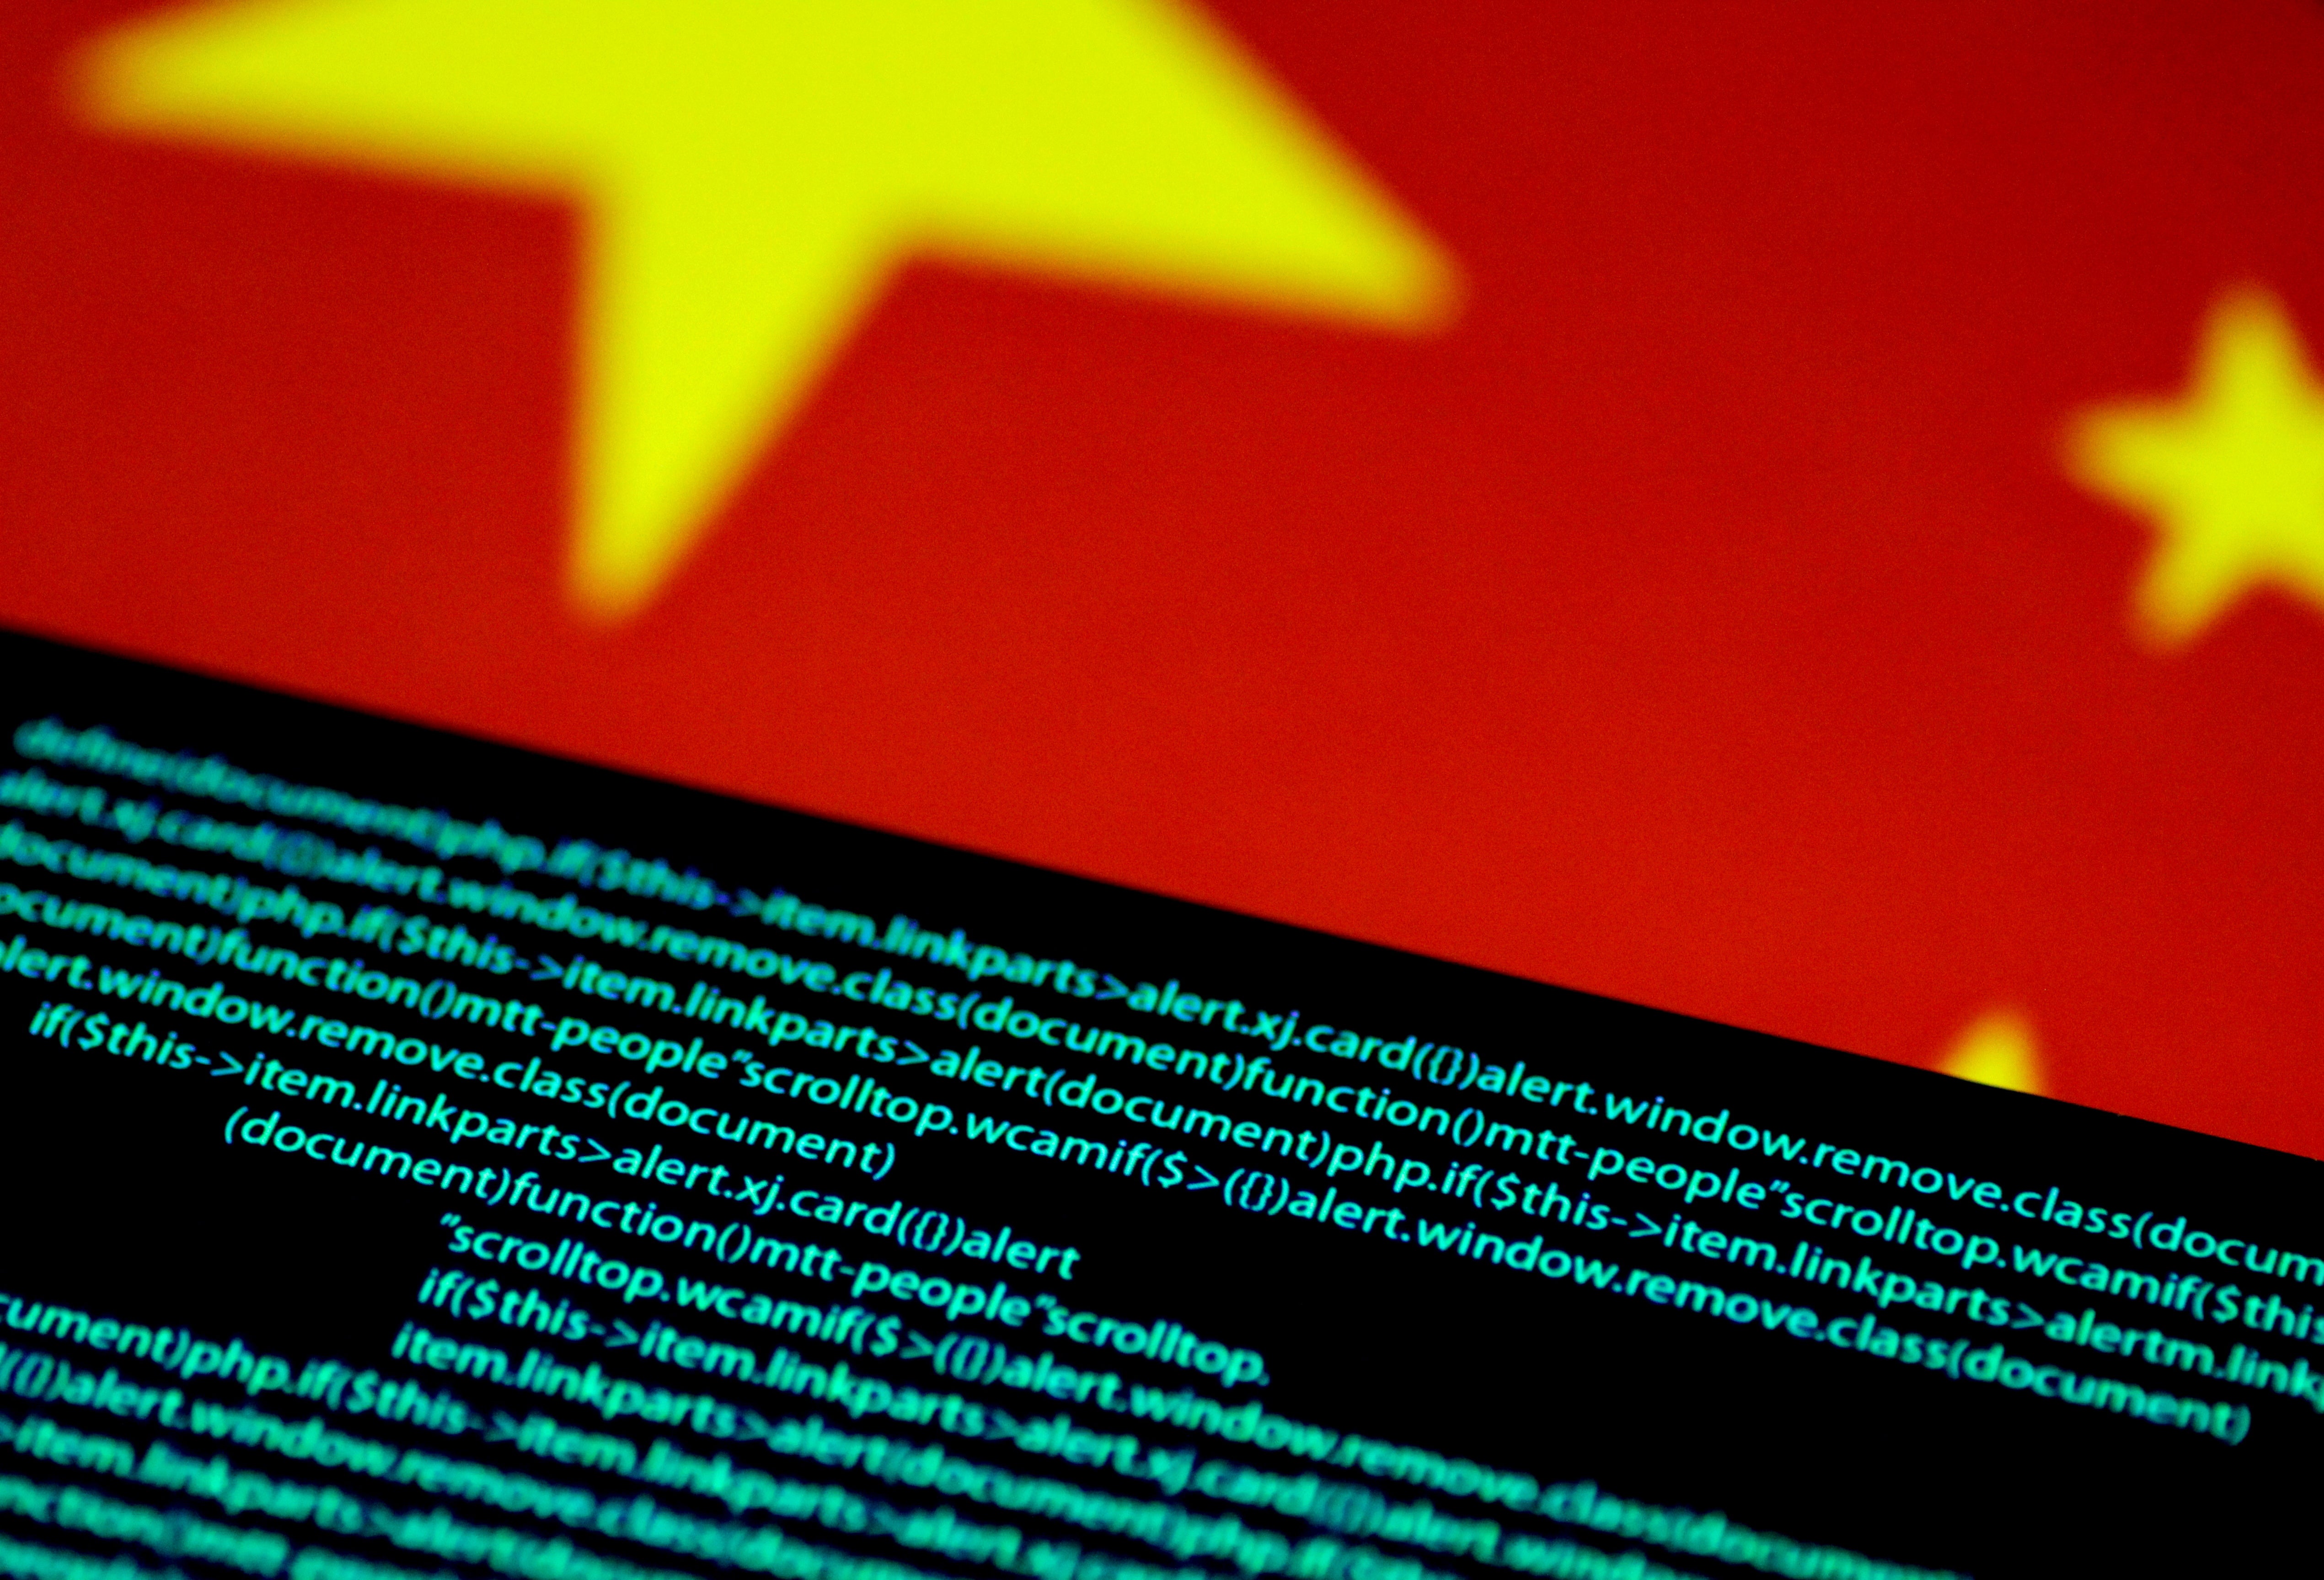 China is accused of being a global threat through its use of cyberwarfare